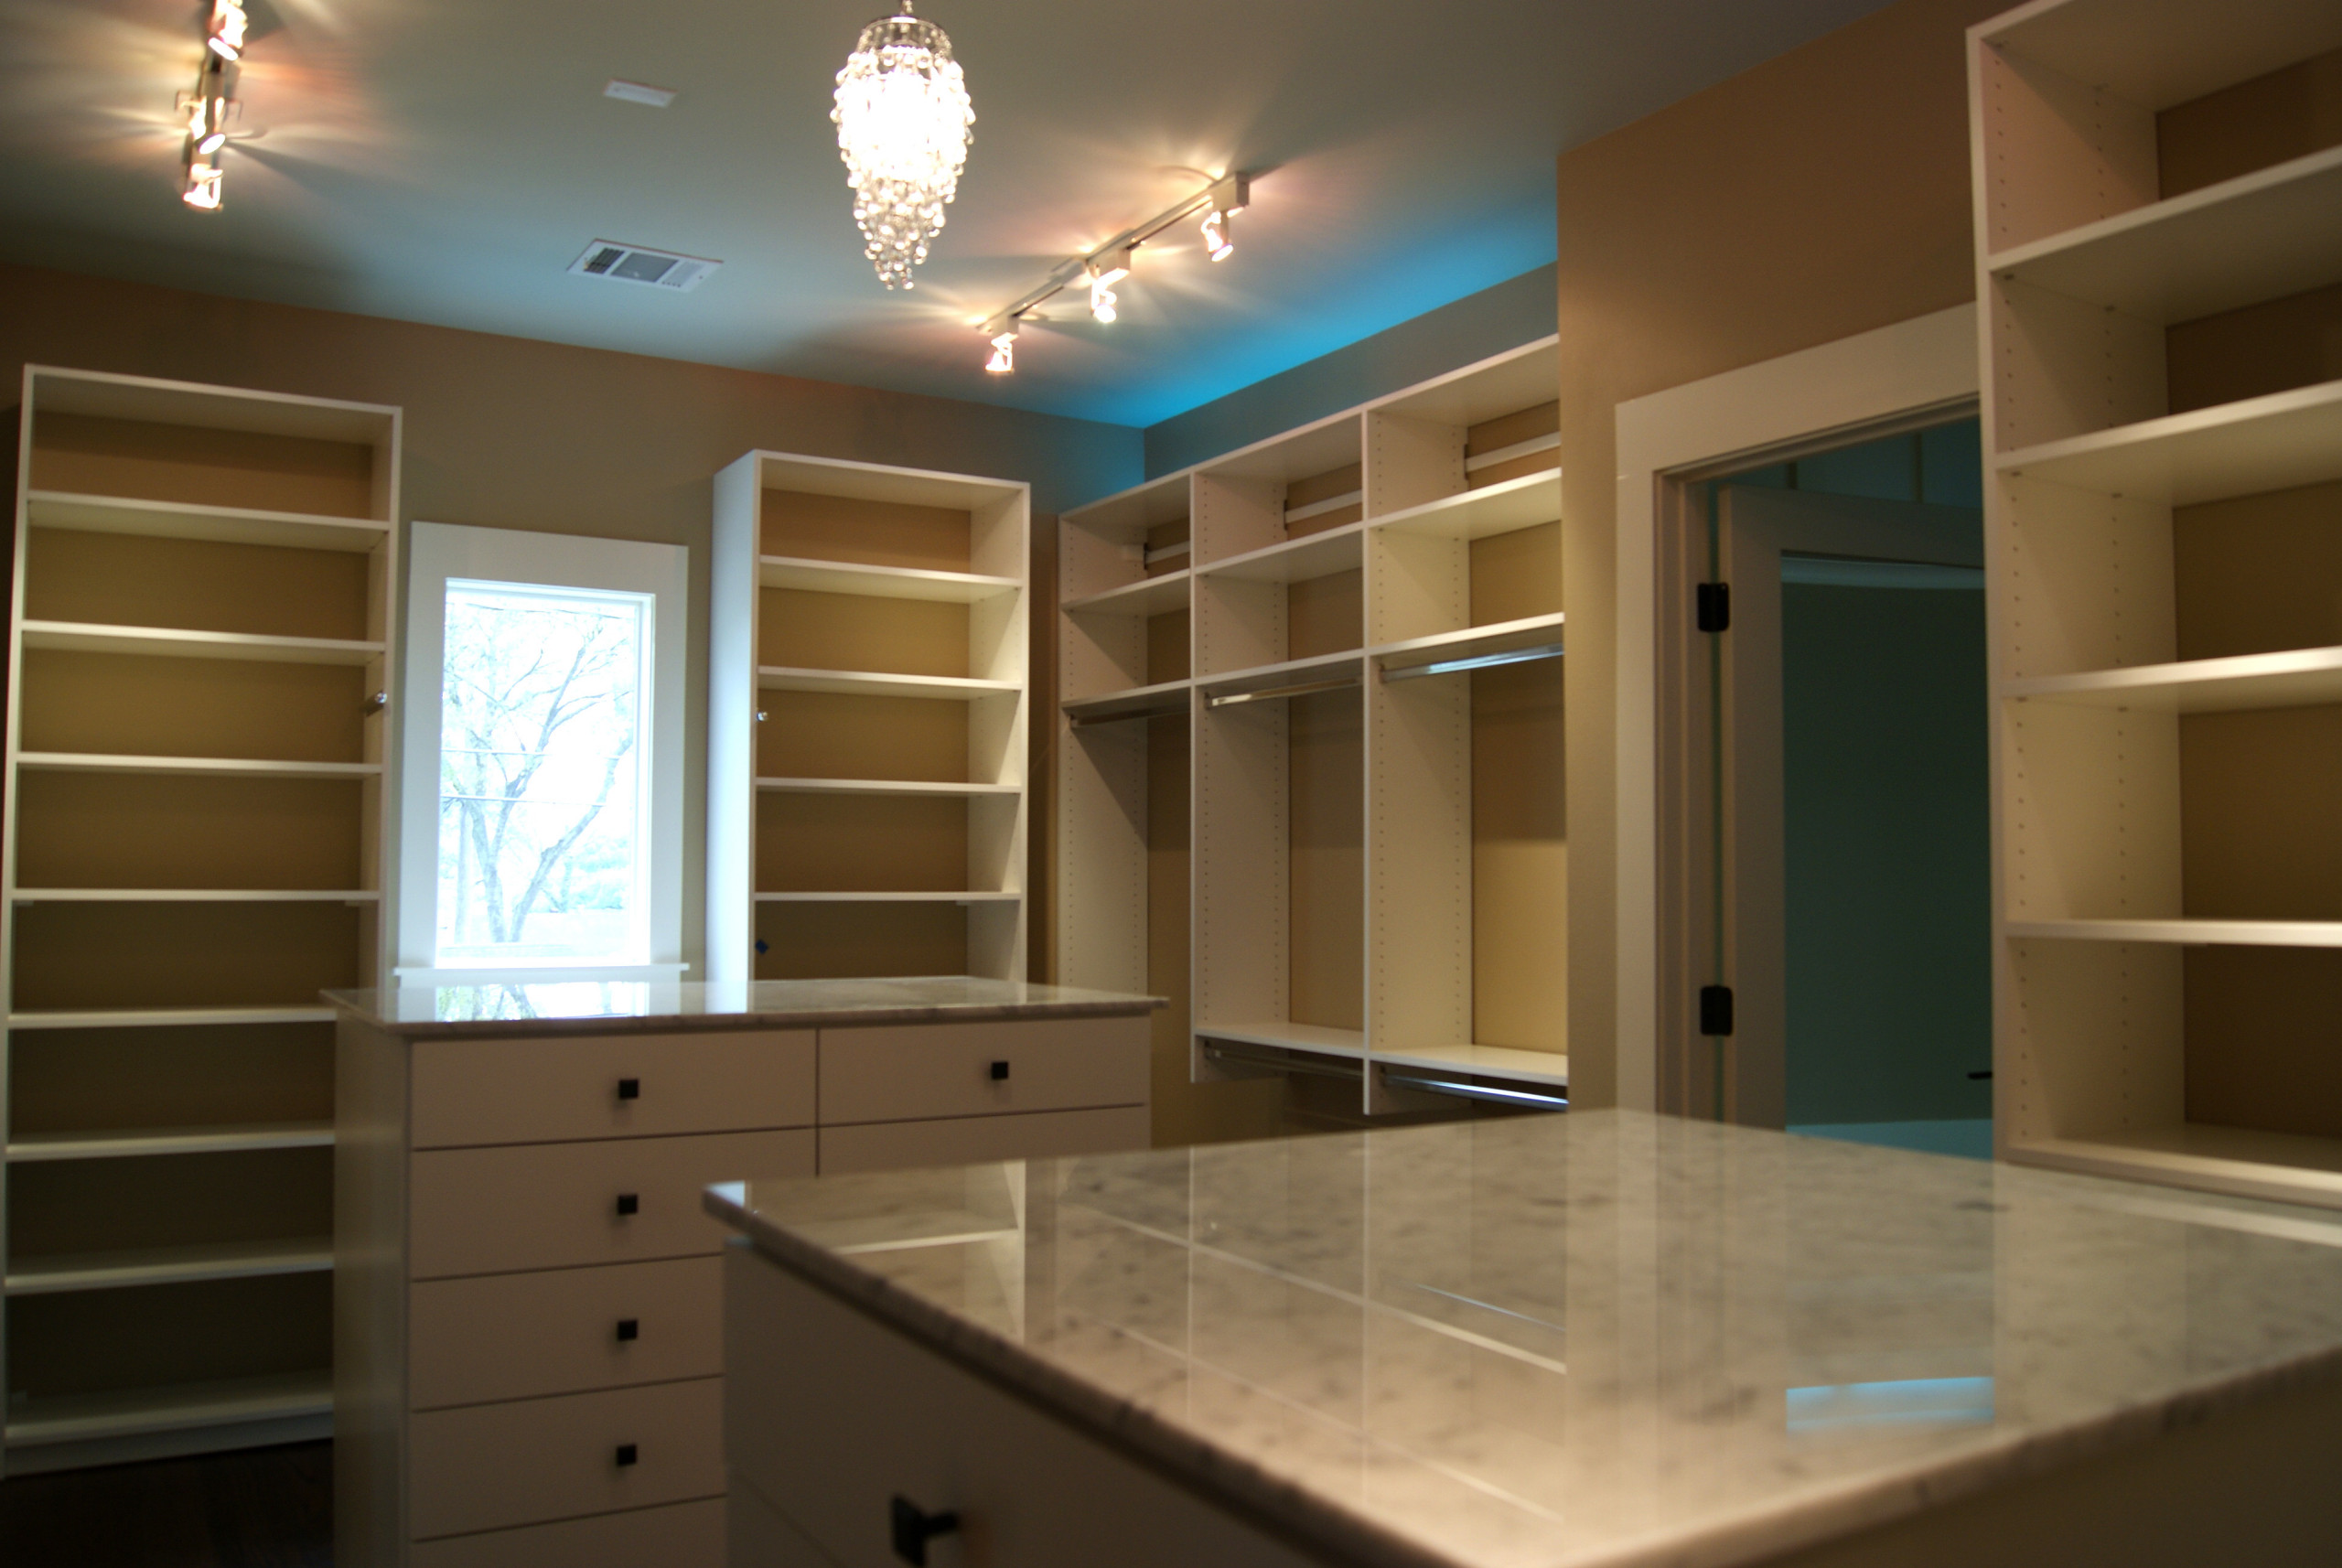 His And Hers Closet - Waypoint Living Spaces